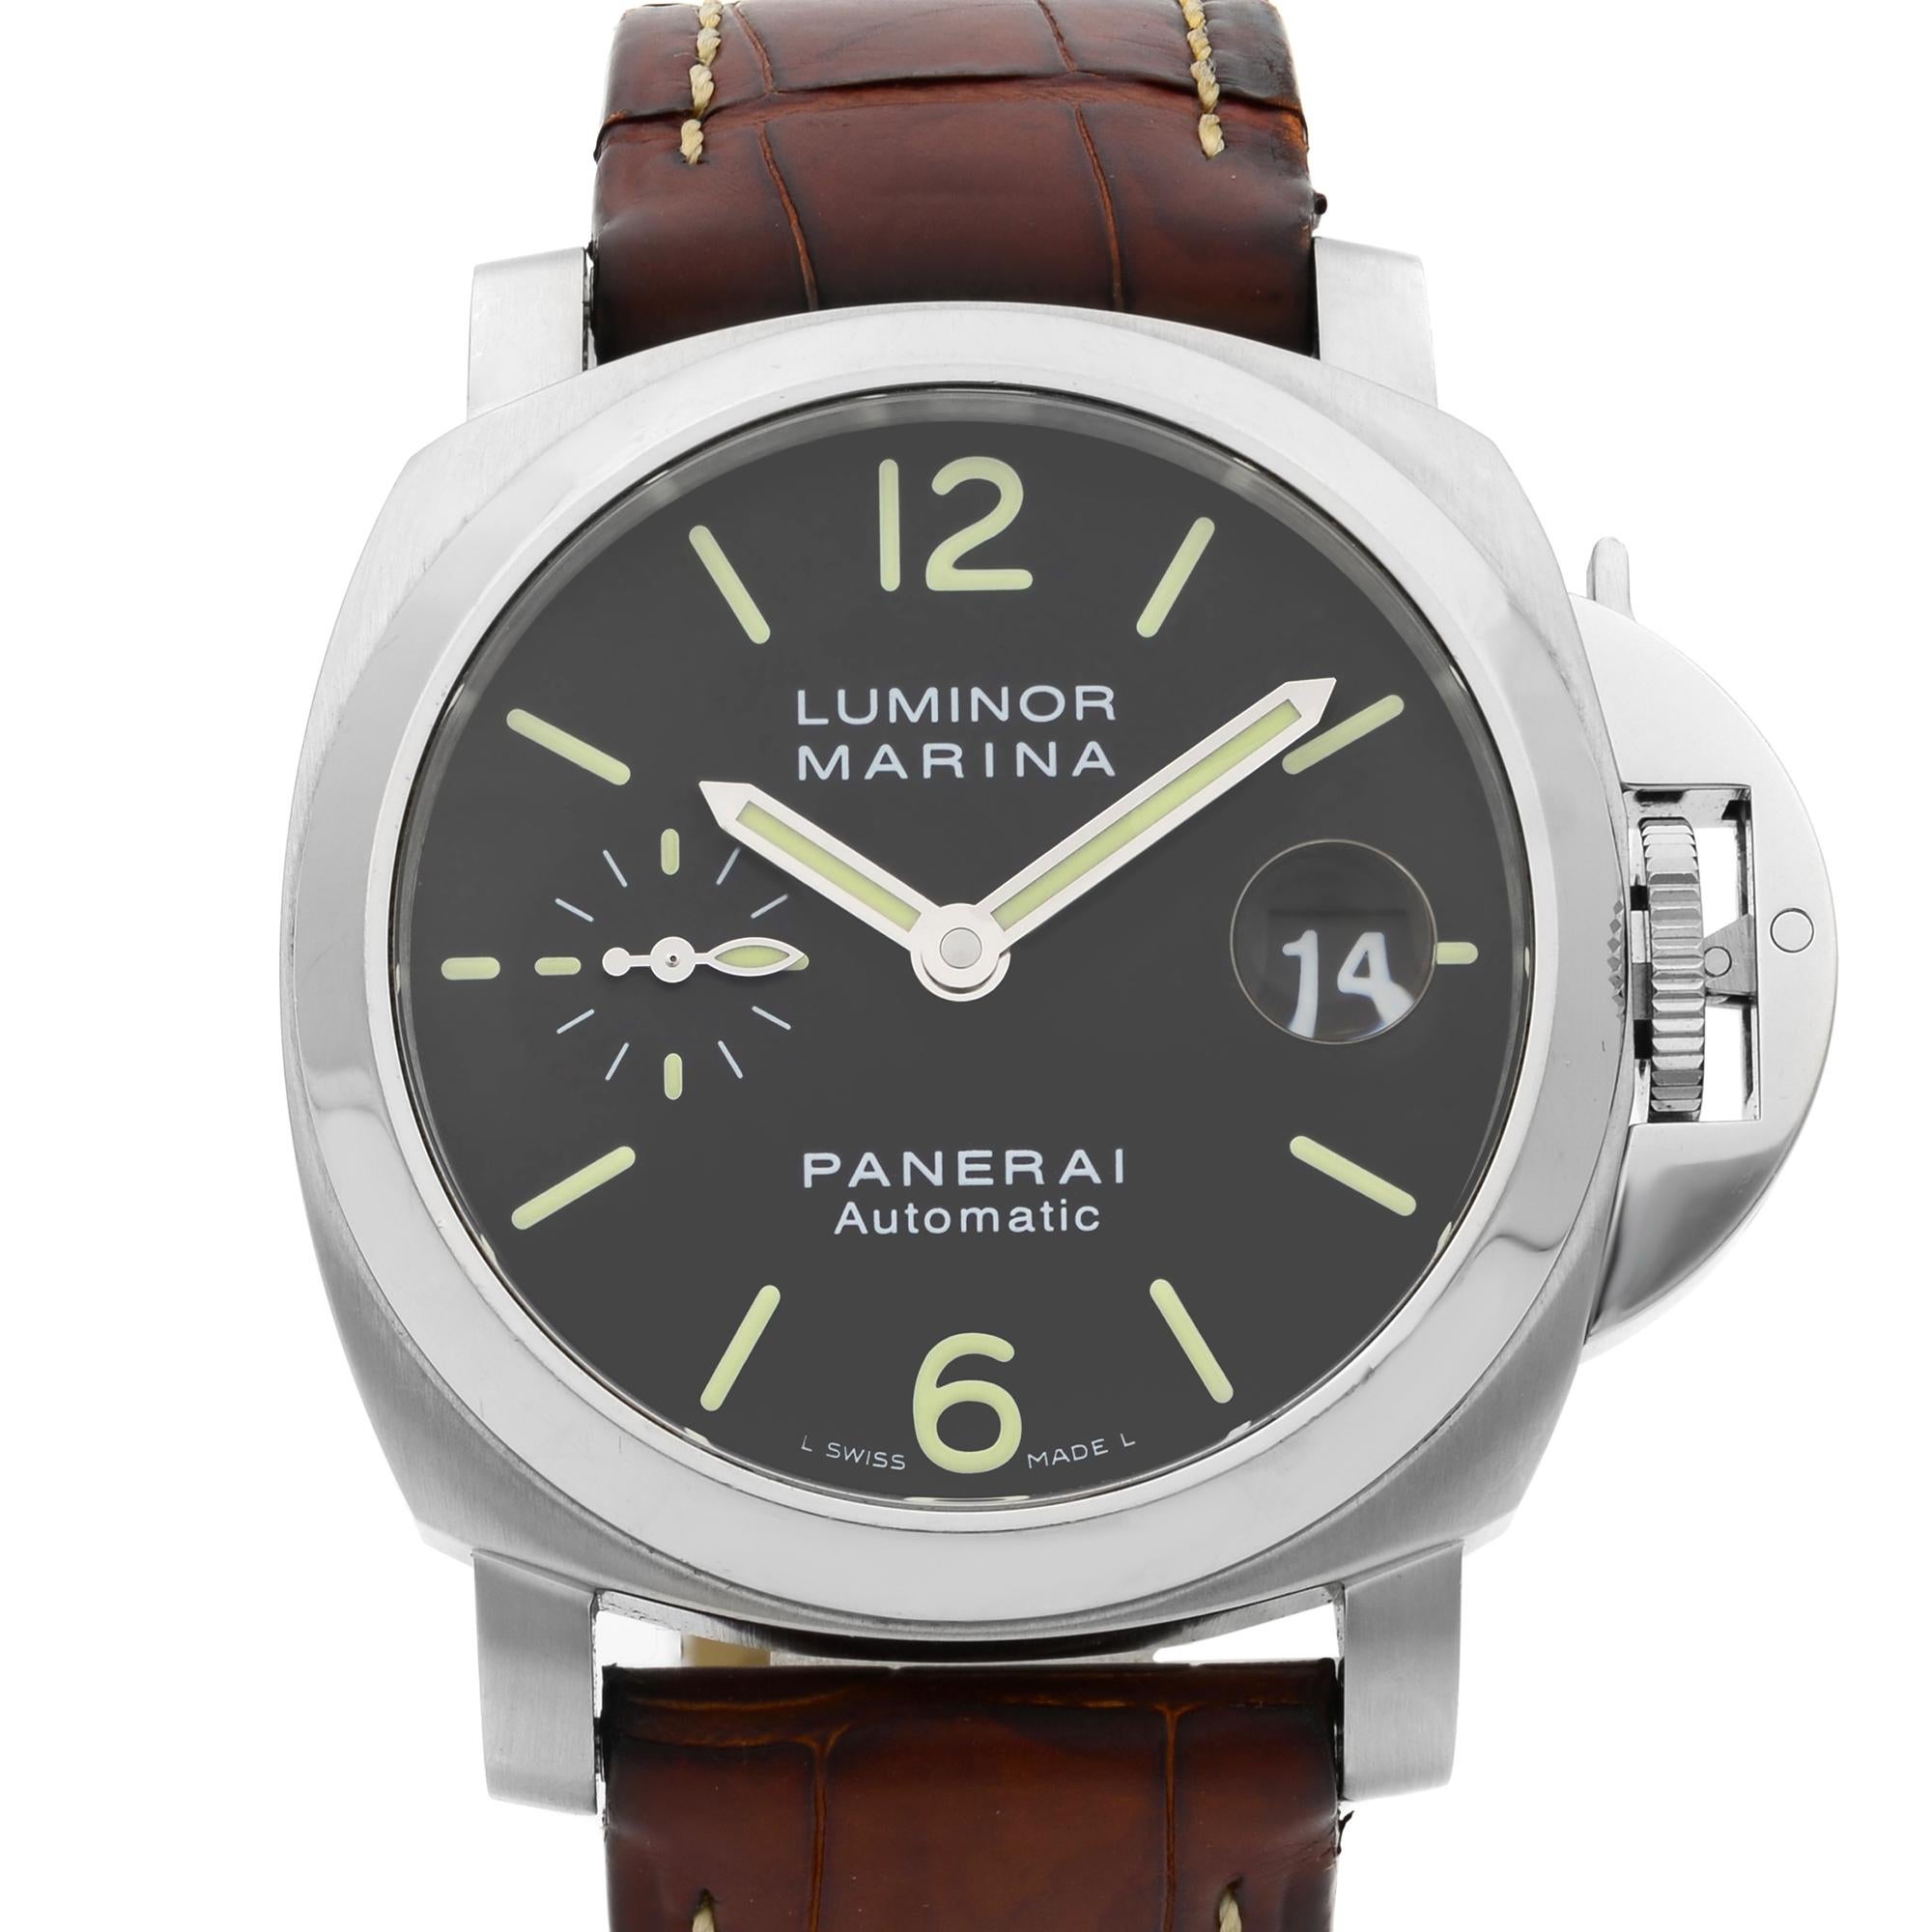 This pre-owned Panerai Luminor Marina PAM00048 is a beautiful men's timepiece that is powered by a mechanical (automatic) movement which is cased in a stainless steel case. It has a round shape face, date indicator, small seconds subdial dial, and